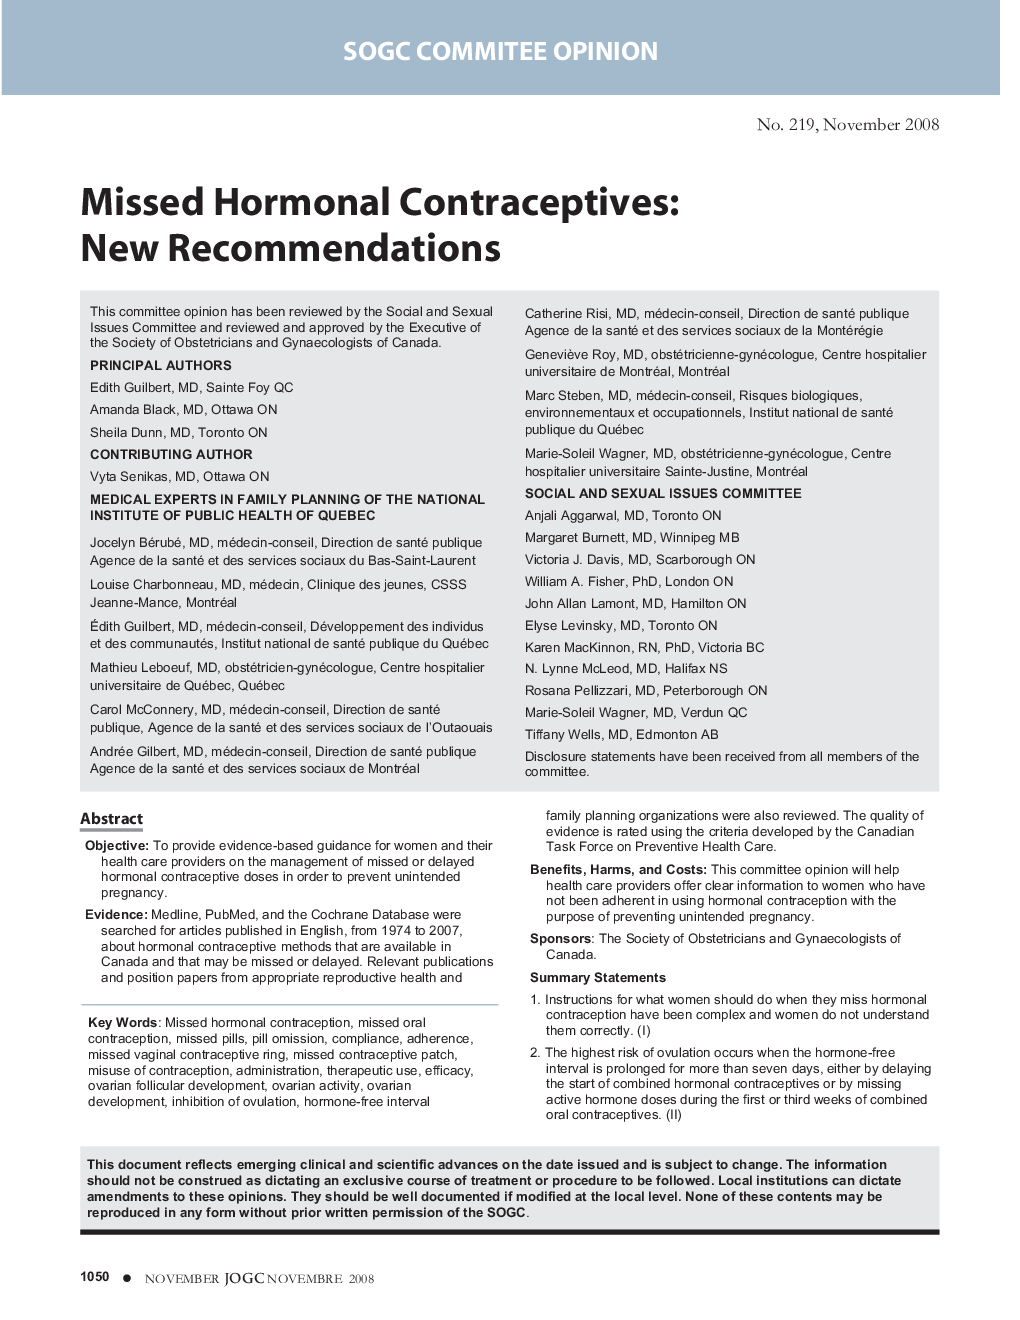 Missed Hormonal Contraceptives: New Recommendations